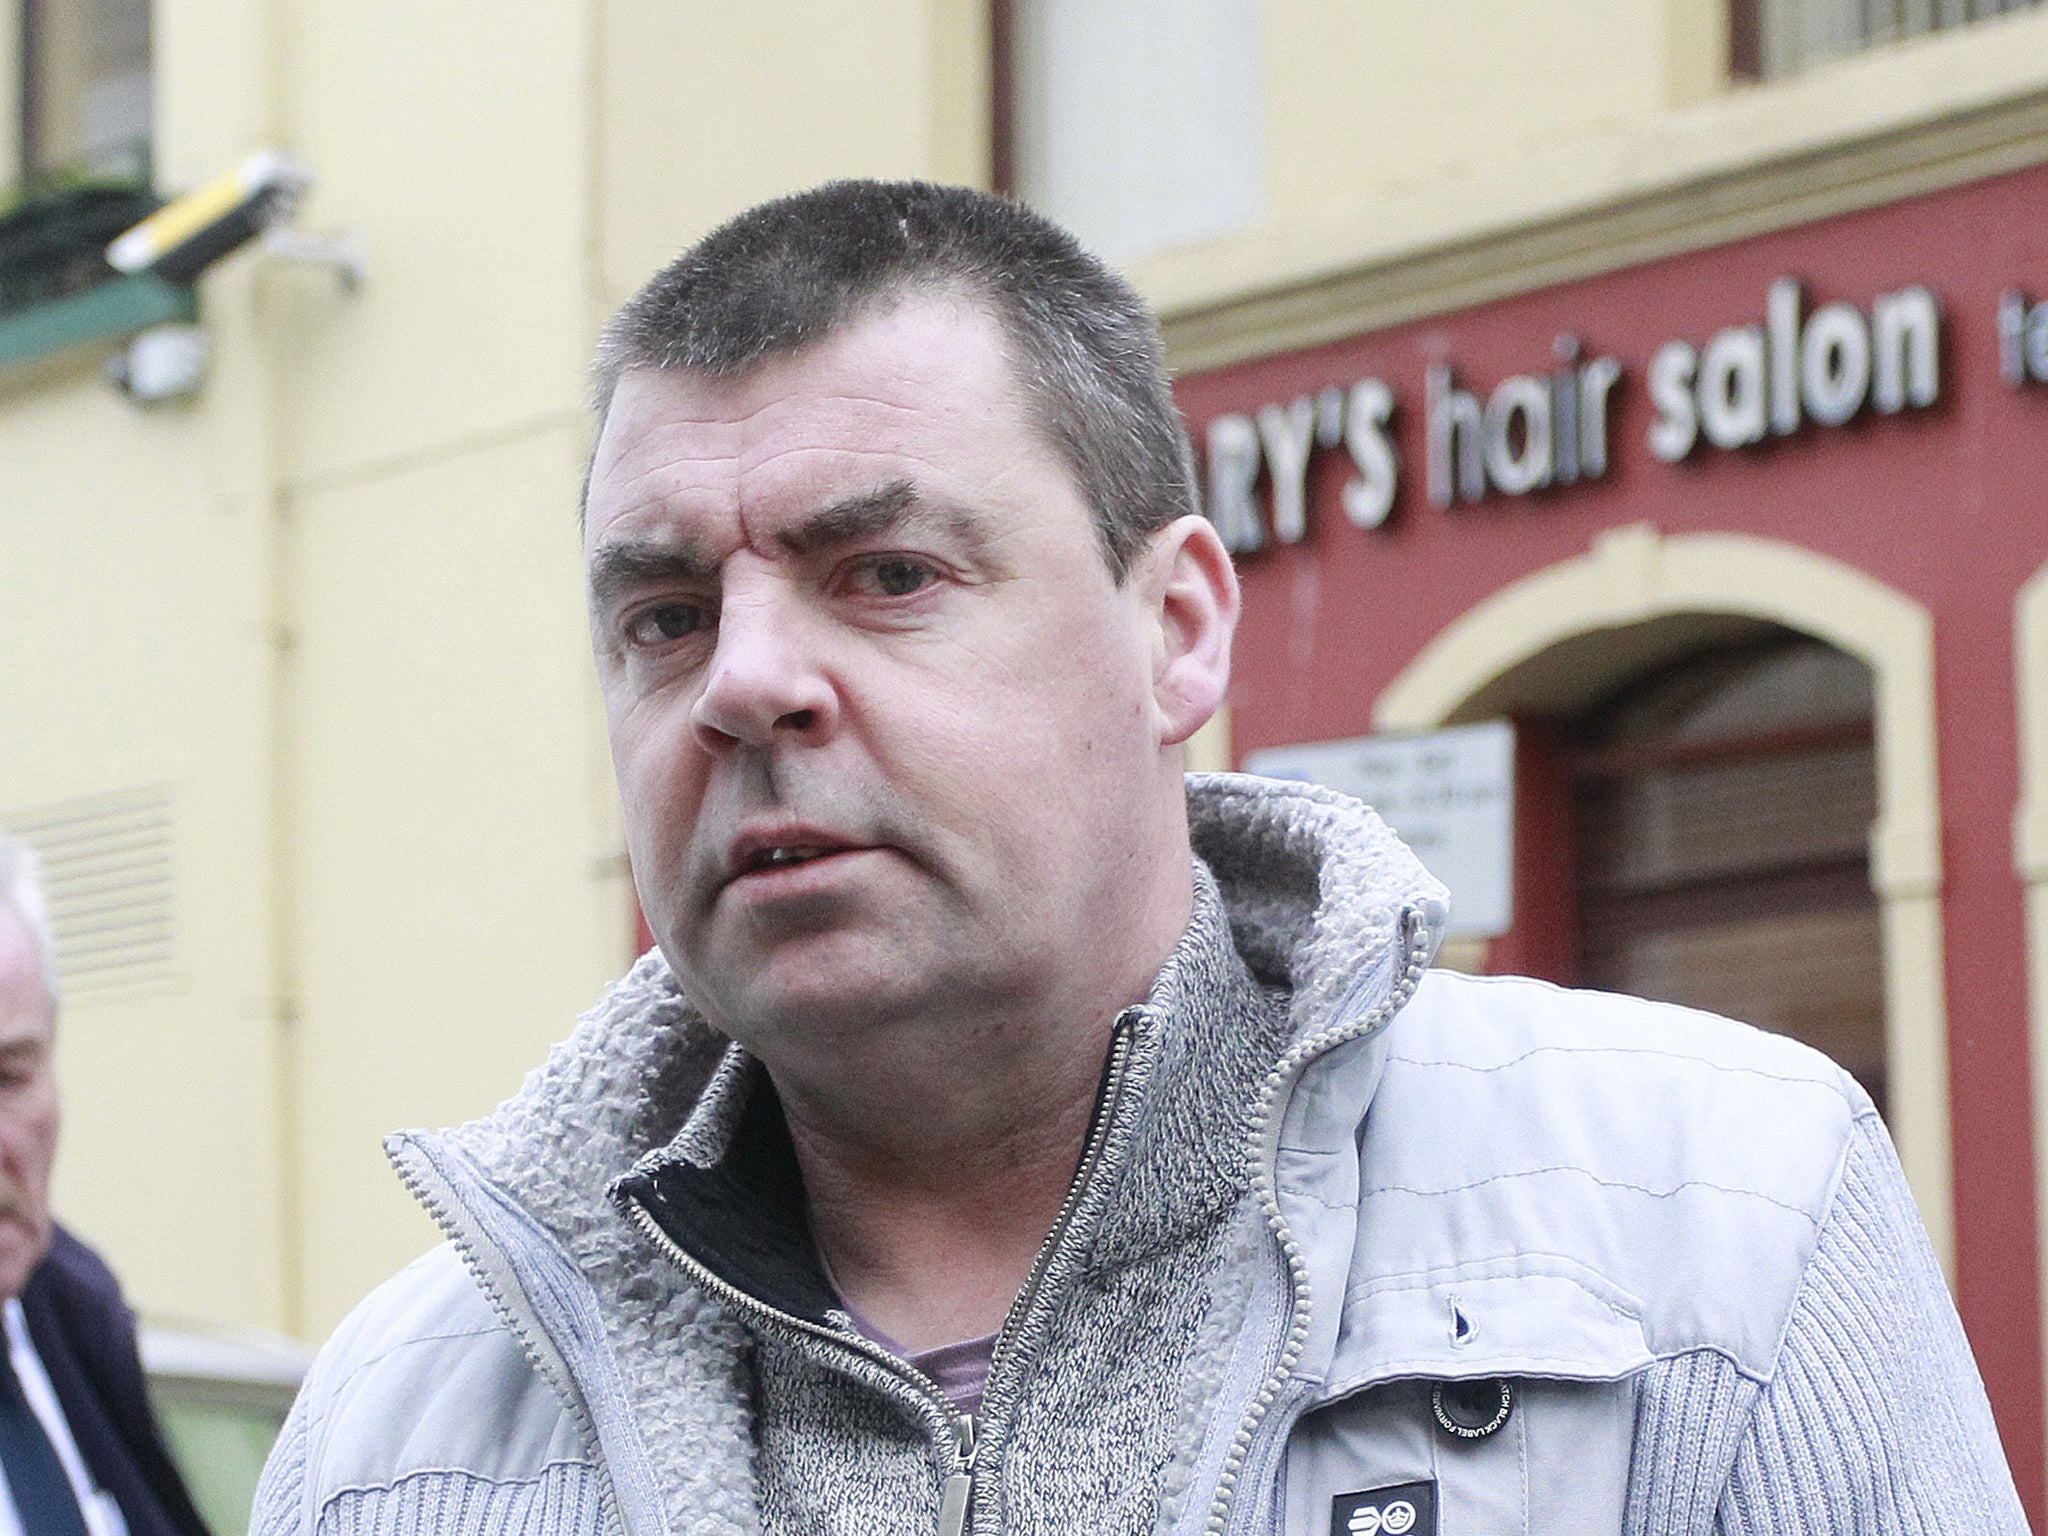 Daly, from Co Armagh, has always denied involvement in the bombing